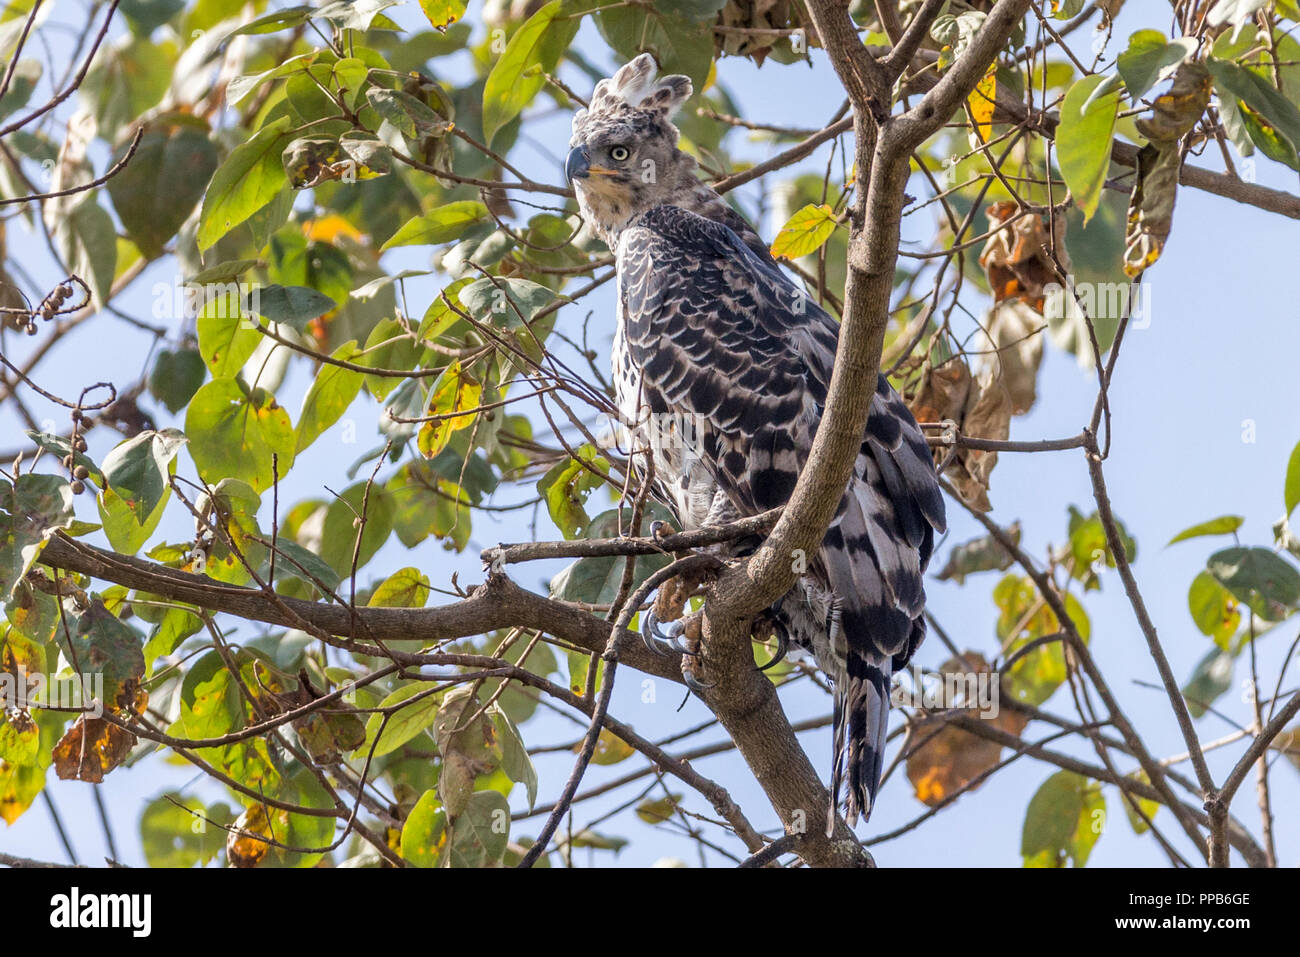 Crowned Eagle Aka The African Crowned Eagle Or The Crowned Hawk Eagle